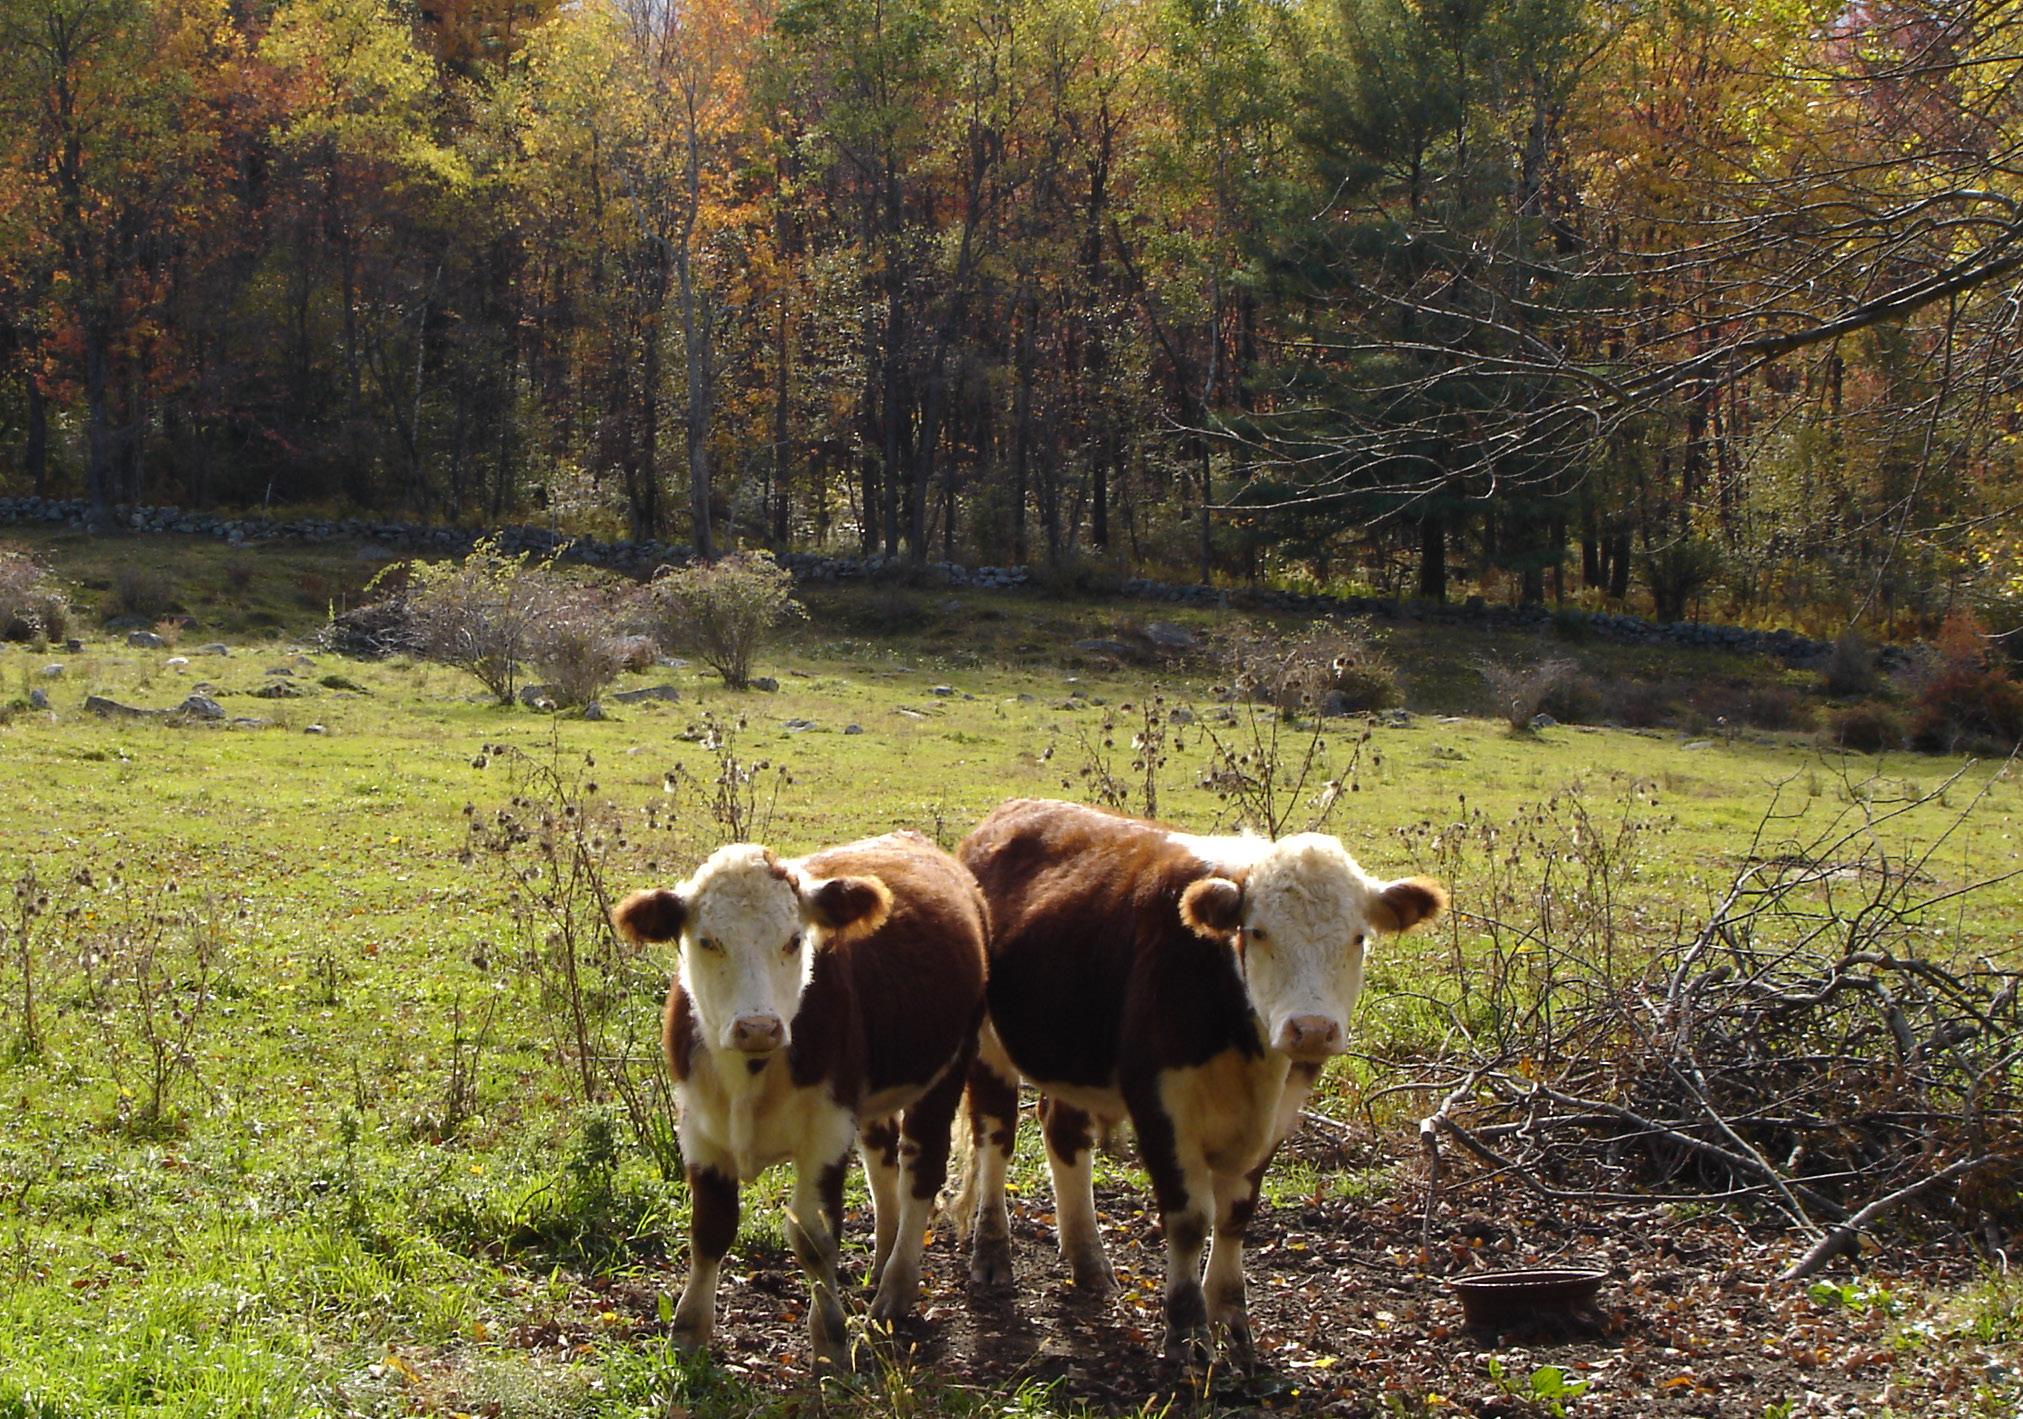 Curious Cows (user submitted)